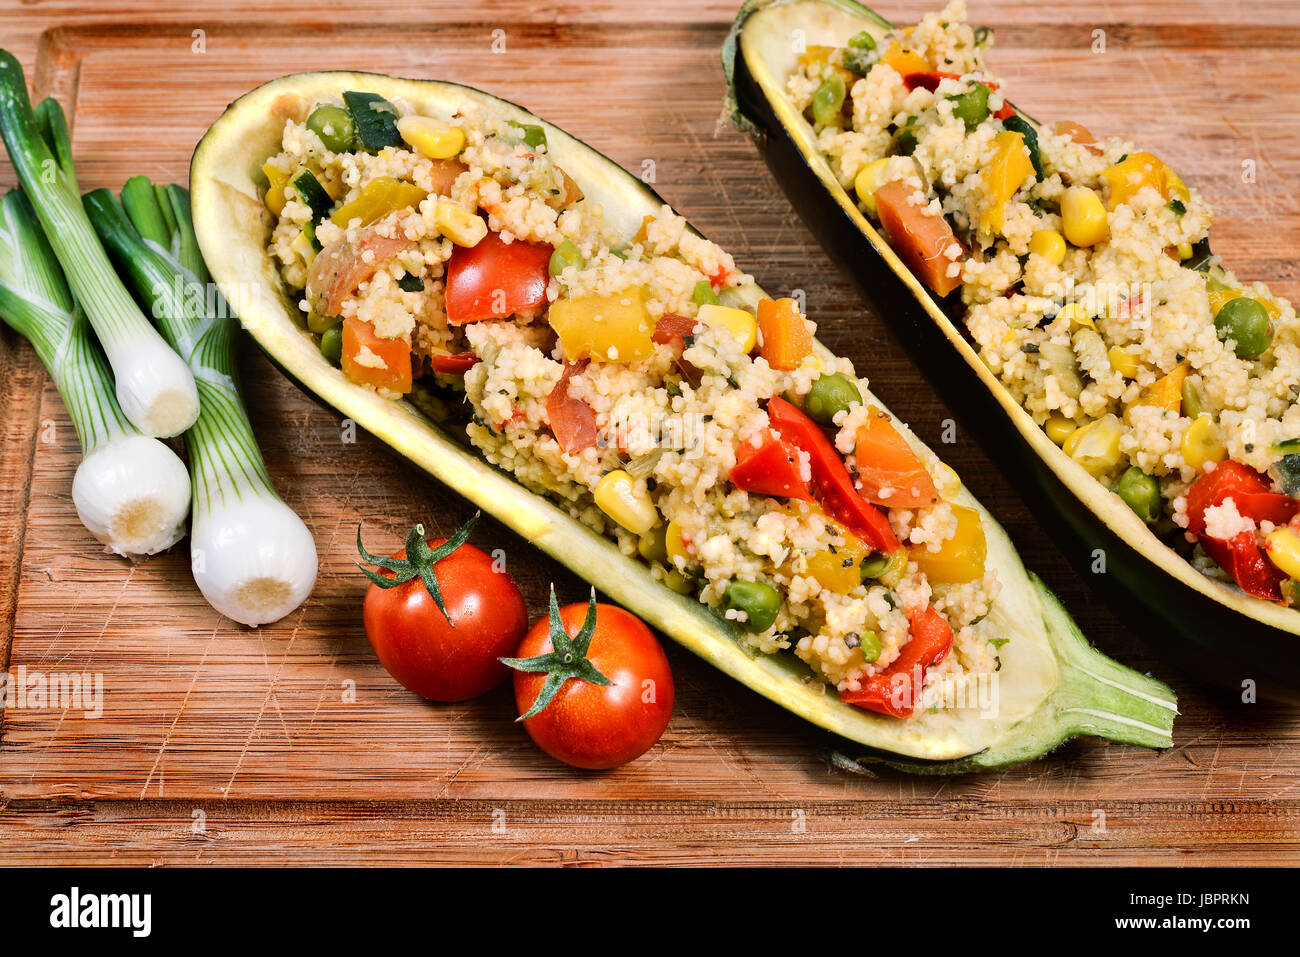 couscous with vegetables inside a hollowed eggplant Stock Photo